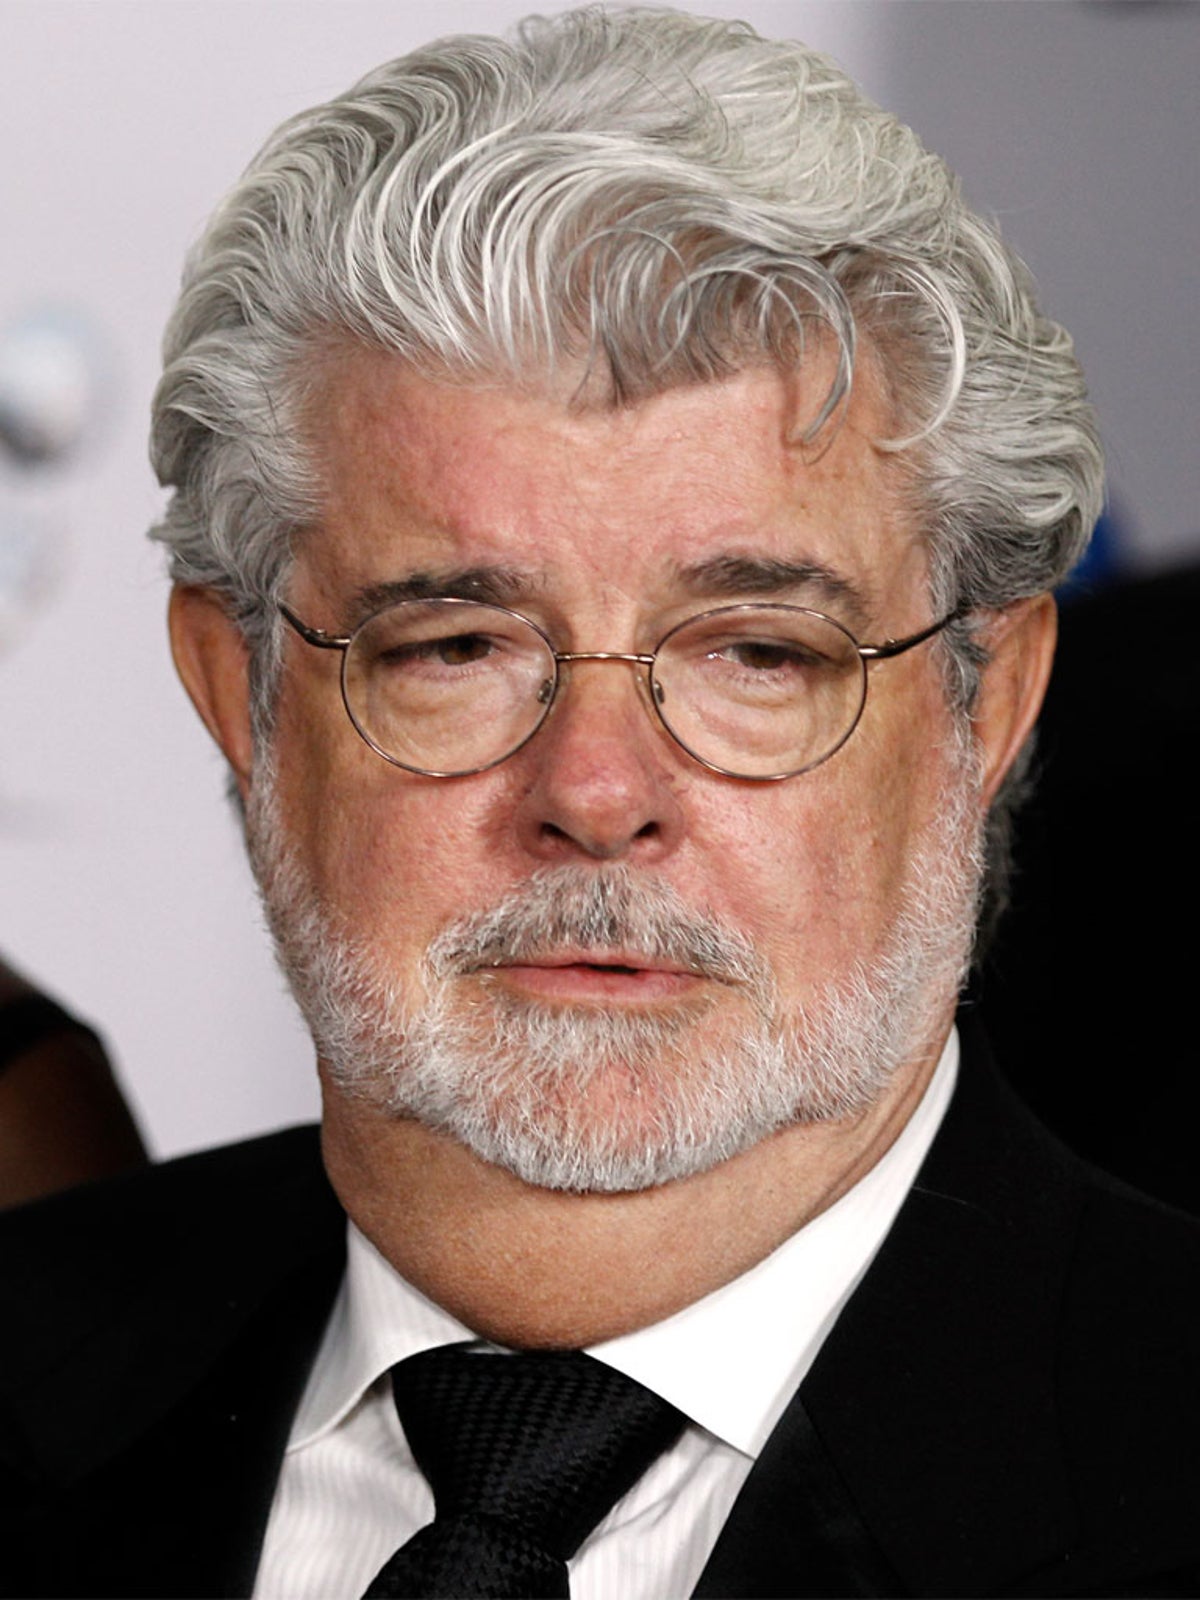 The final episode: George Lucas bows to protests and pulls plug on film  studio plans | The Independent | The Independent